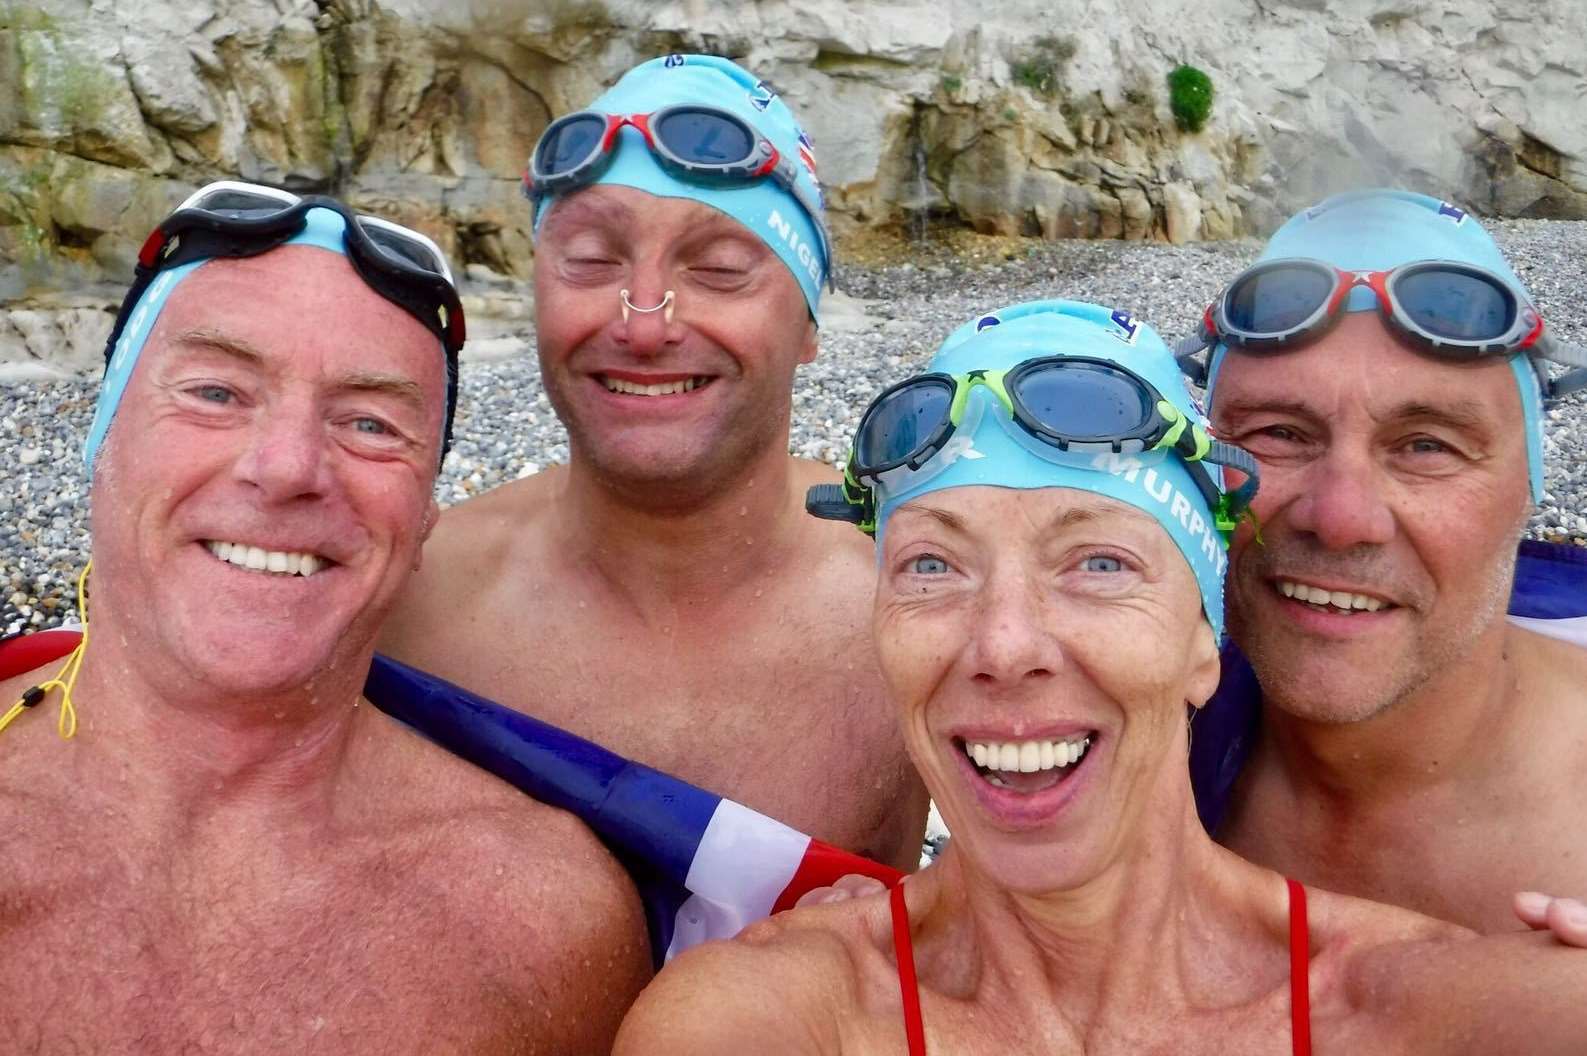 The Channel swimming team. From left Steve Lodge, Nigel Stock (face still hurting from jellyfish stings!), Diane Murphy Weaver and cardiac arrest survivor Steve Fish